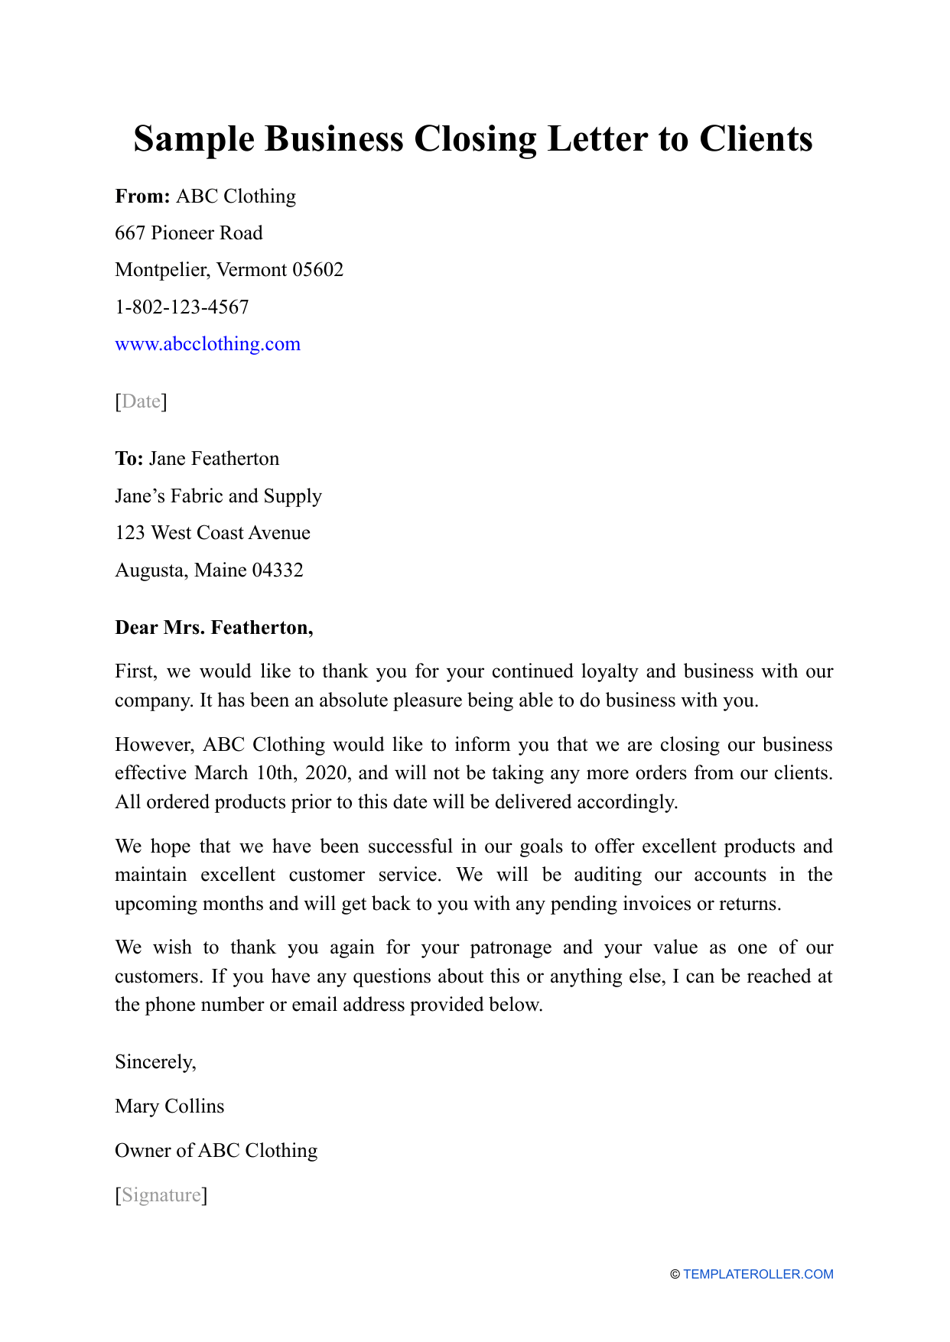 Sample Business Closing Letter to Clients Fill Out, Sign Online and